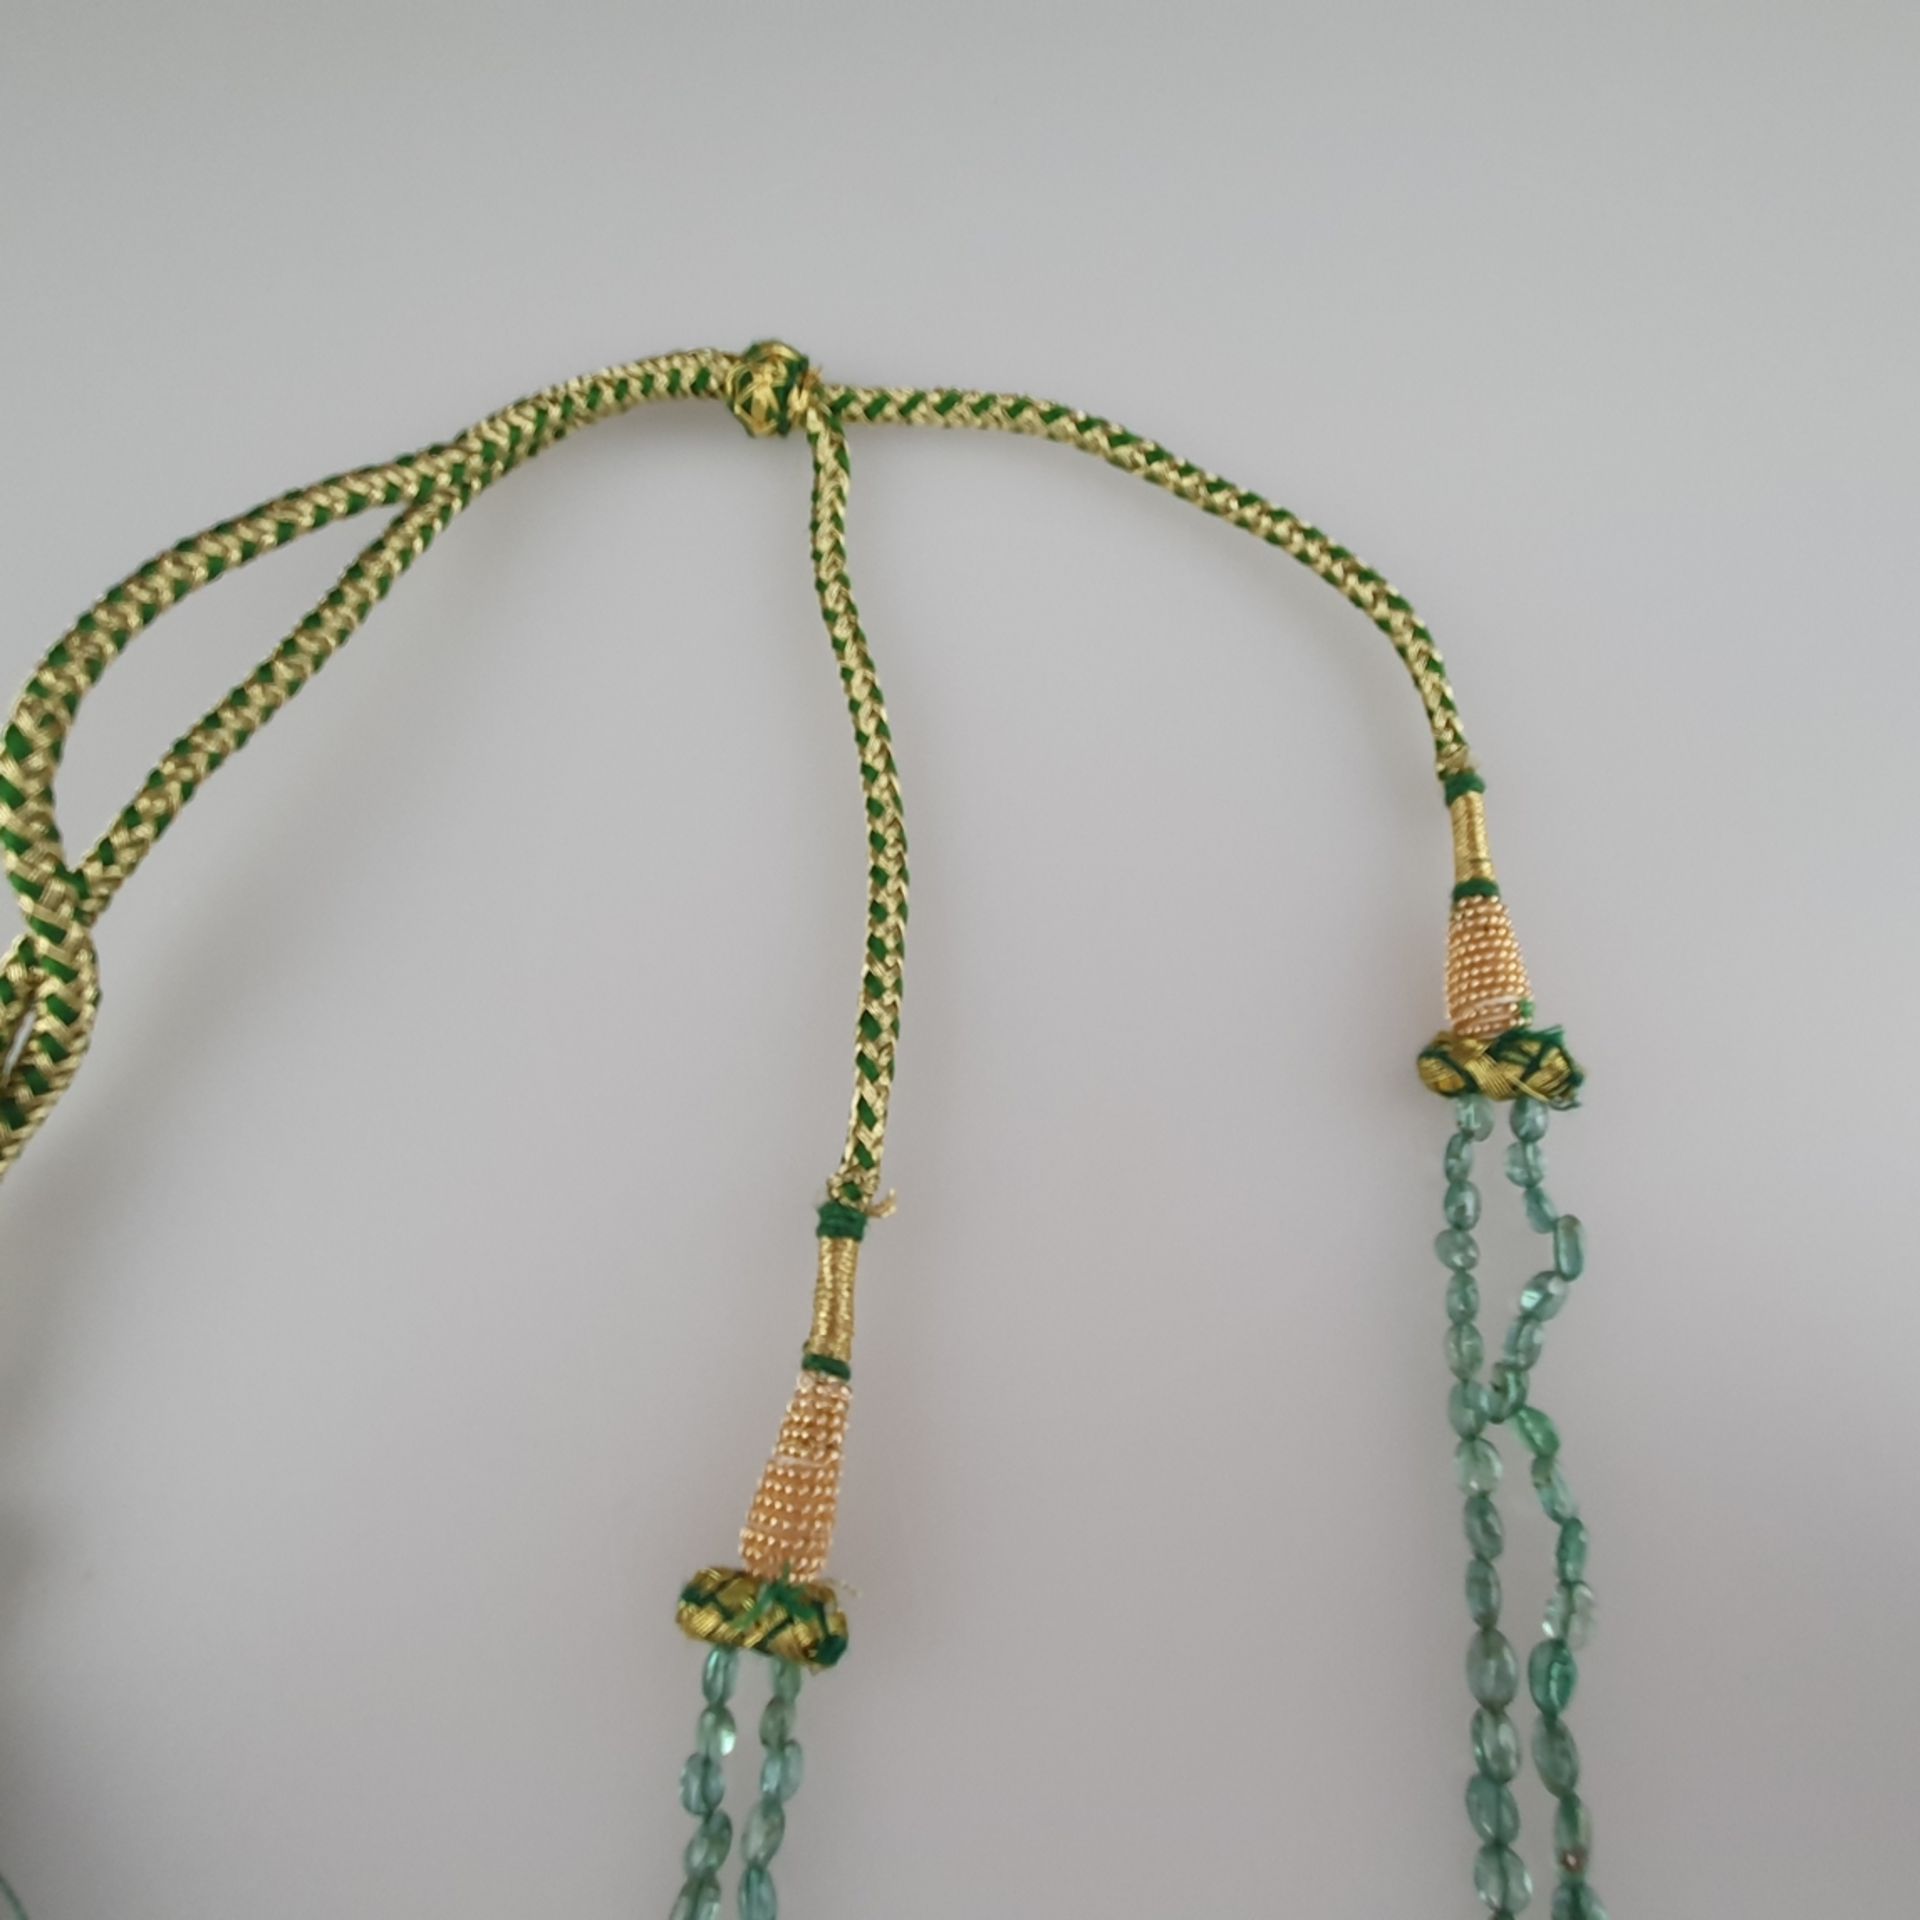 Smaragd-Collier - zweireihige Halskette mit Smaragd-Cab | 125 cts Cabochon Emerald 2 Strand Necklac - Image 3 of 4